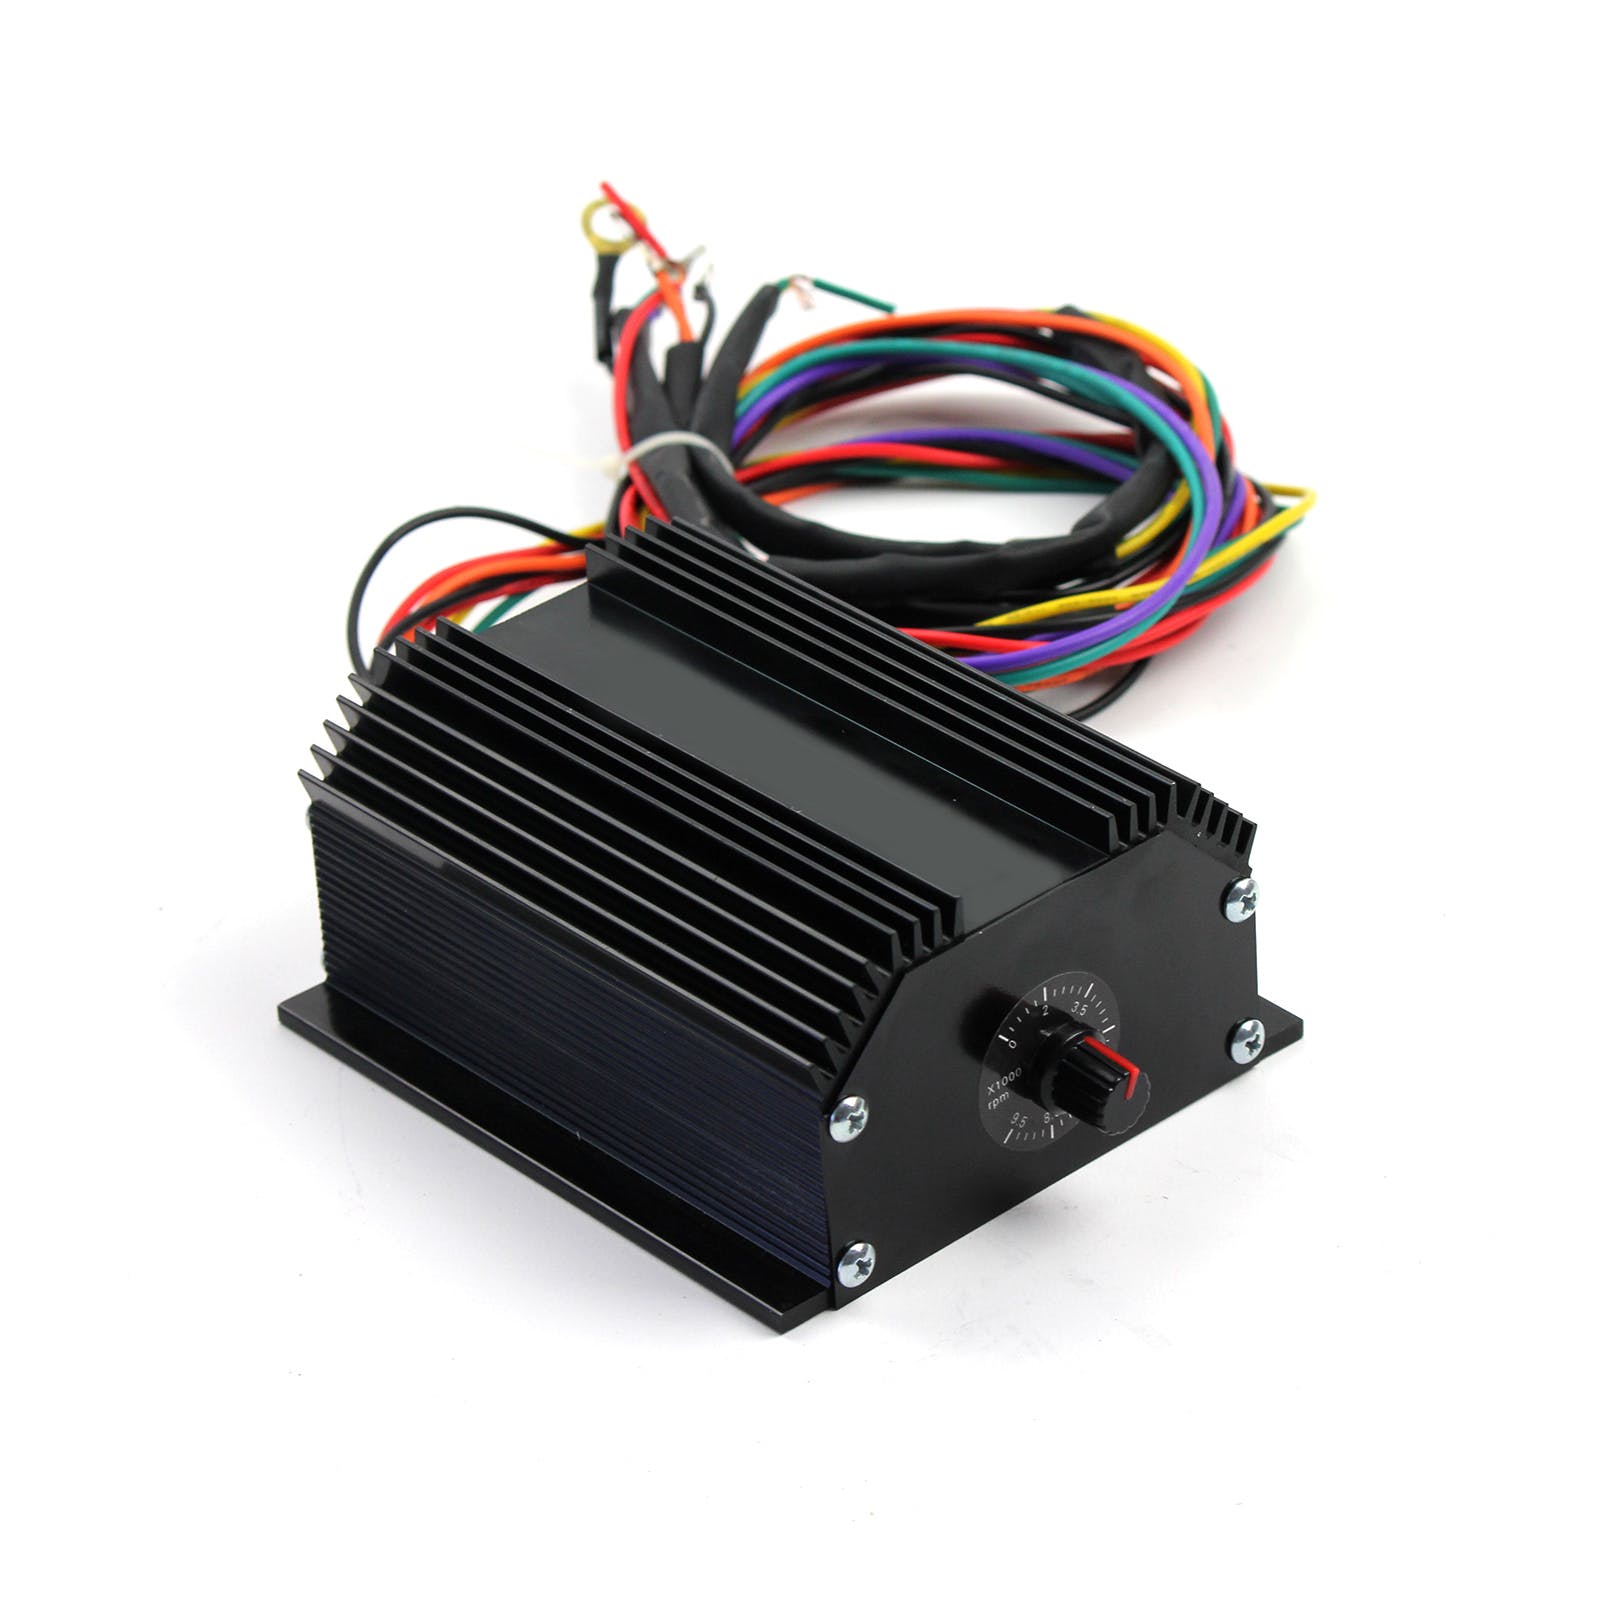 Speedmaster PCE380.1015 Multiple Spark CDI Ignition Box w/ Rev Lim Black Finned Top (No Chips Needed)